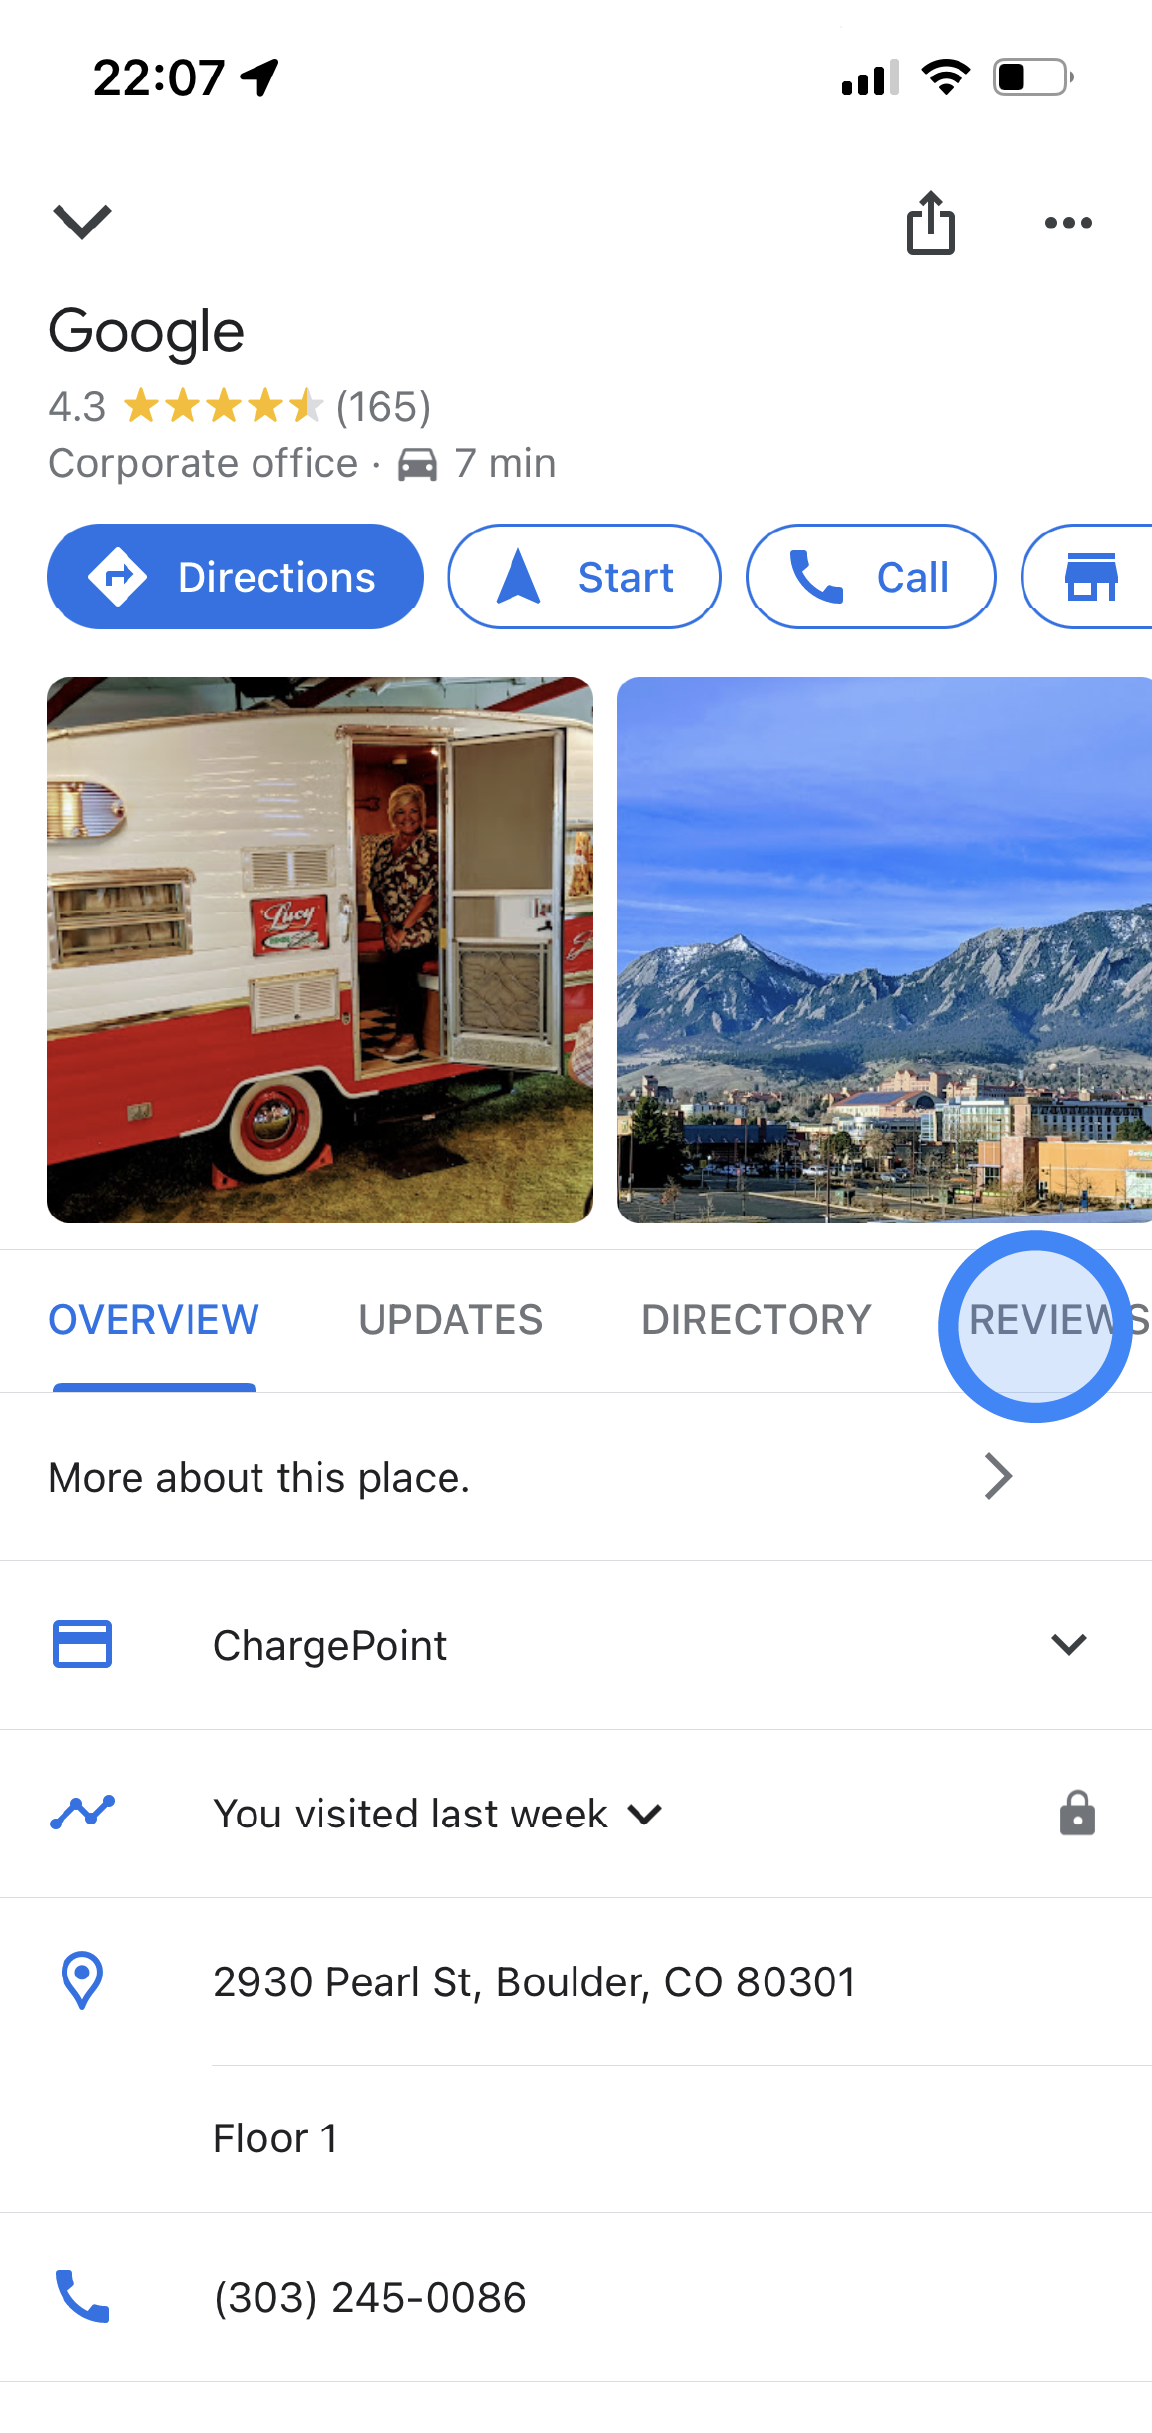 In the Google Maps app, information about a Google office location is displayed. There is information such as average review rating, photos, address, and phone number. In the middle of the screen, there are tabs available to tap. They are labeled Overview, Updates, and Reviews.